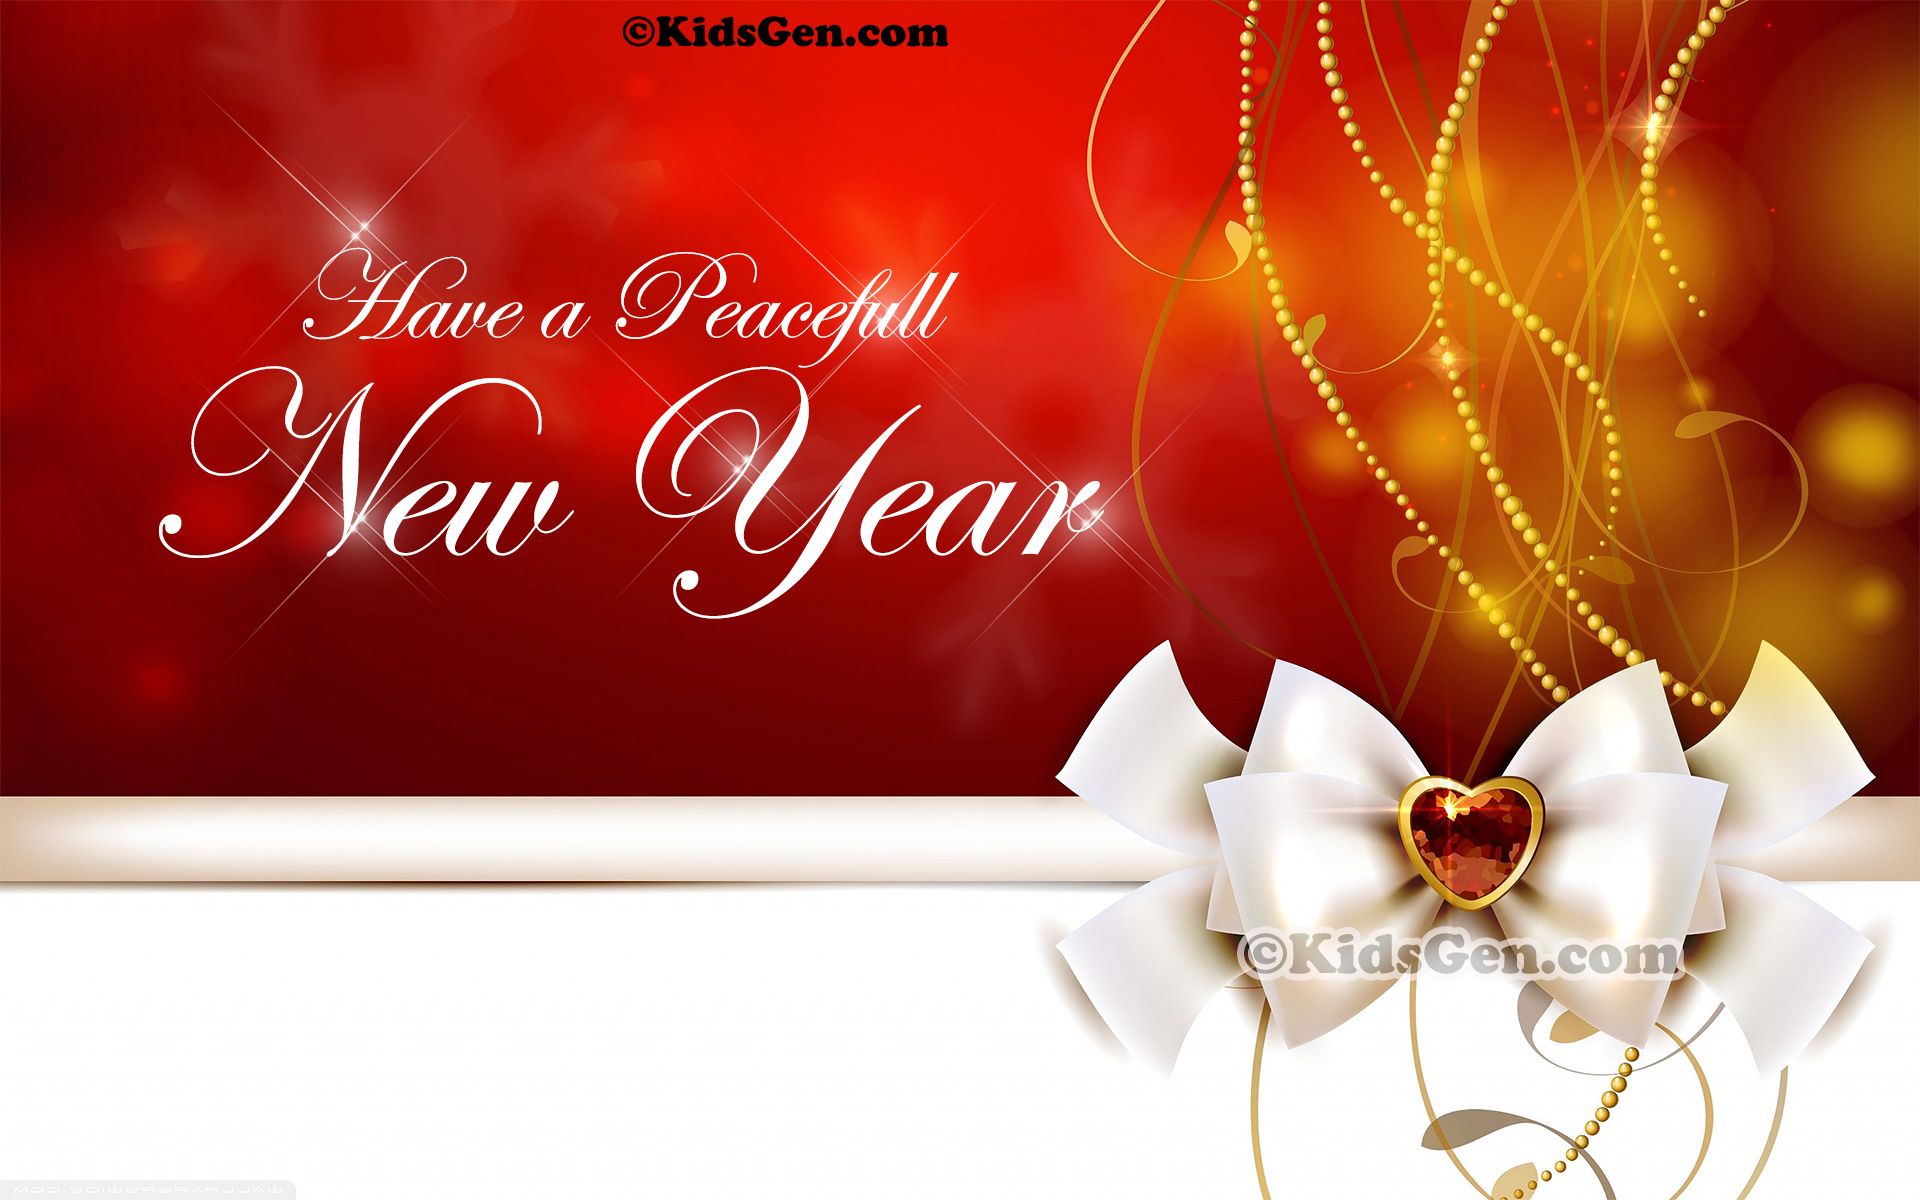 New Year Wallpaper for Desktop, Widescreen, Mobile and High Definition